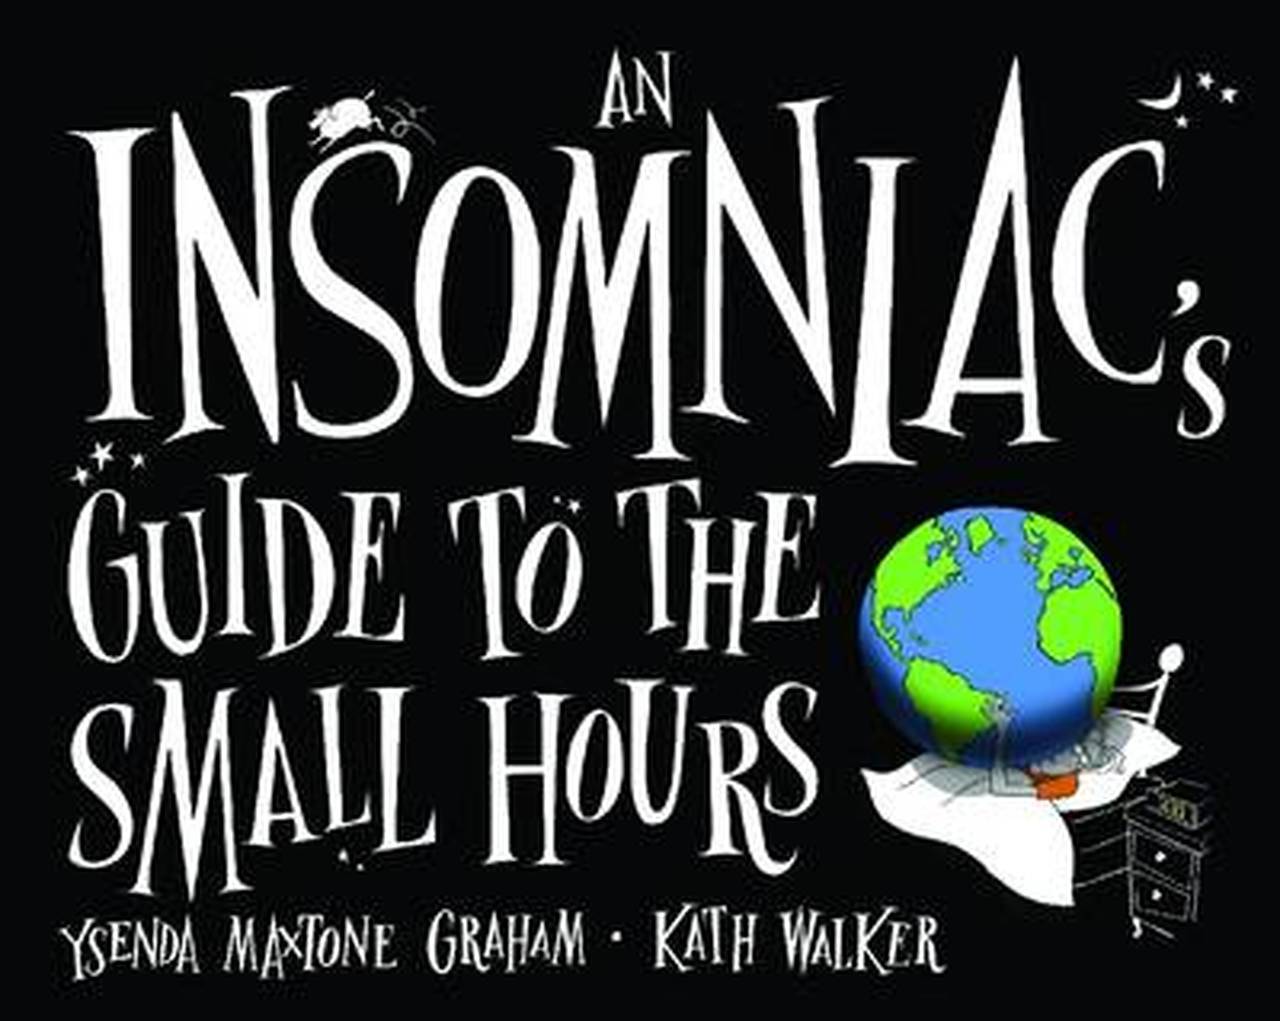 AN INSOMNIACS GUIDE TO THE SMALL HOURS